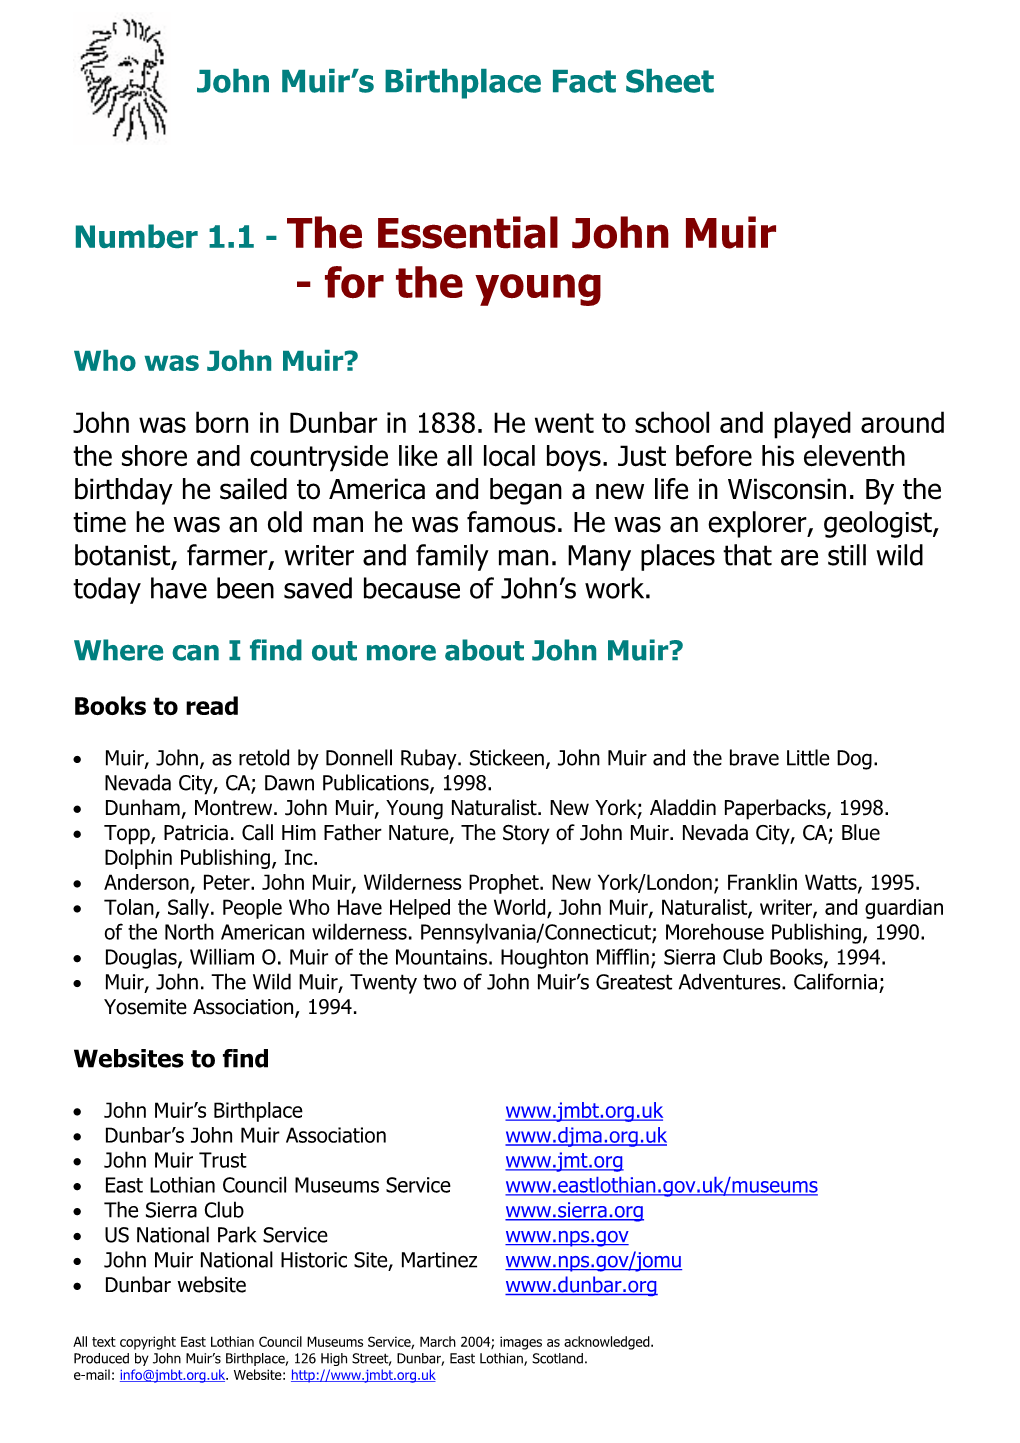 The Essential John Muir - for the Young